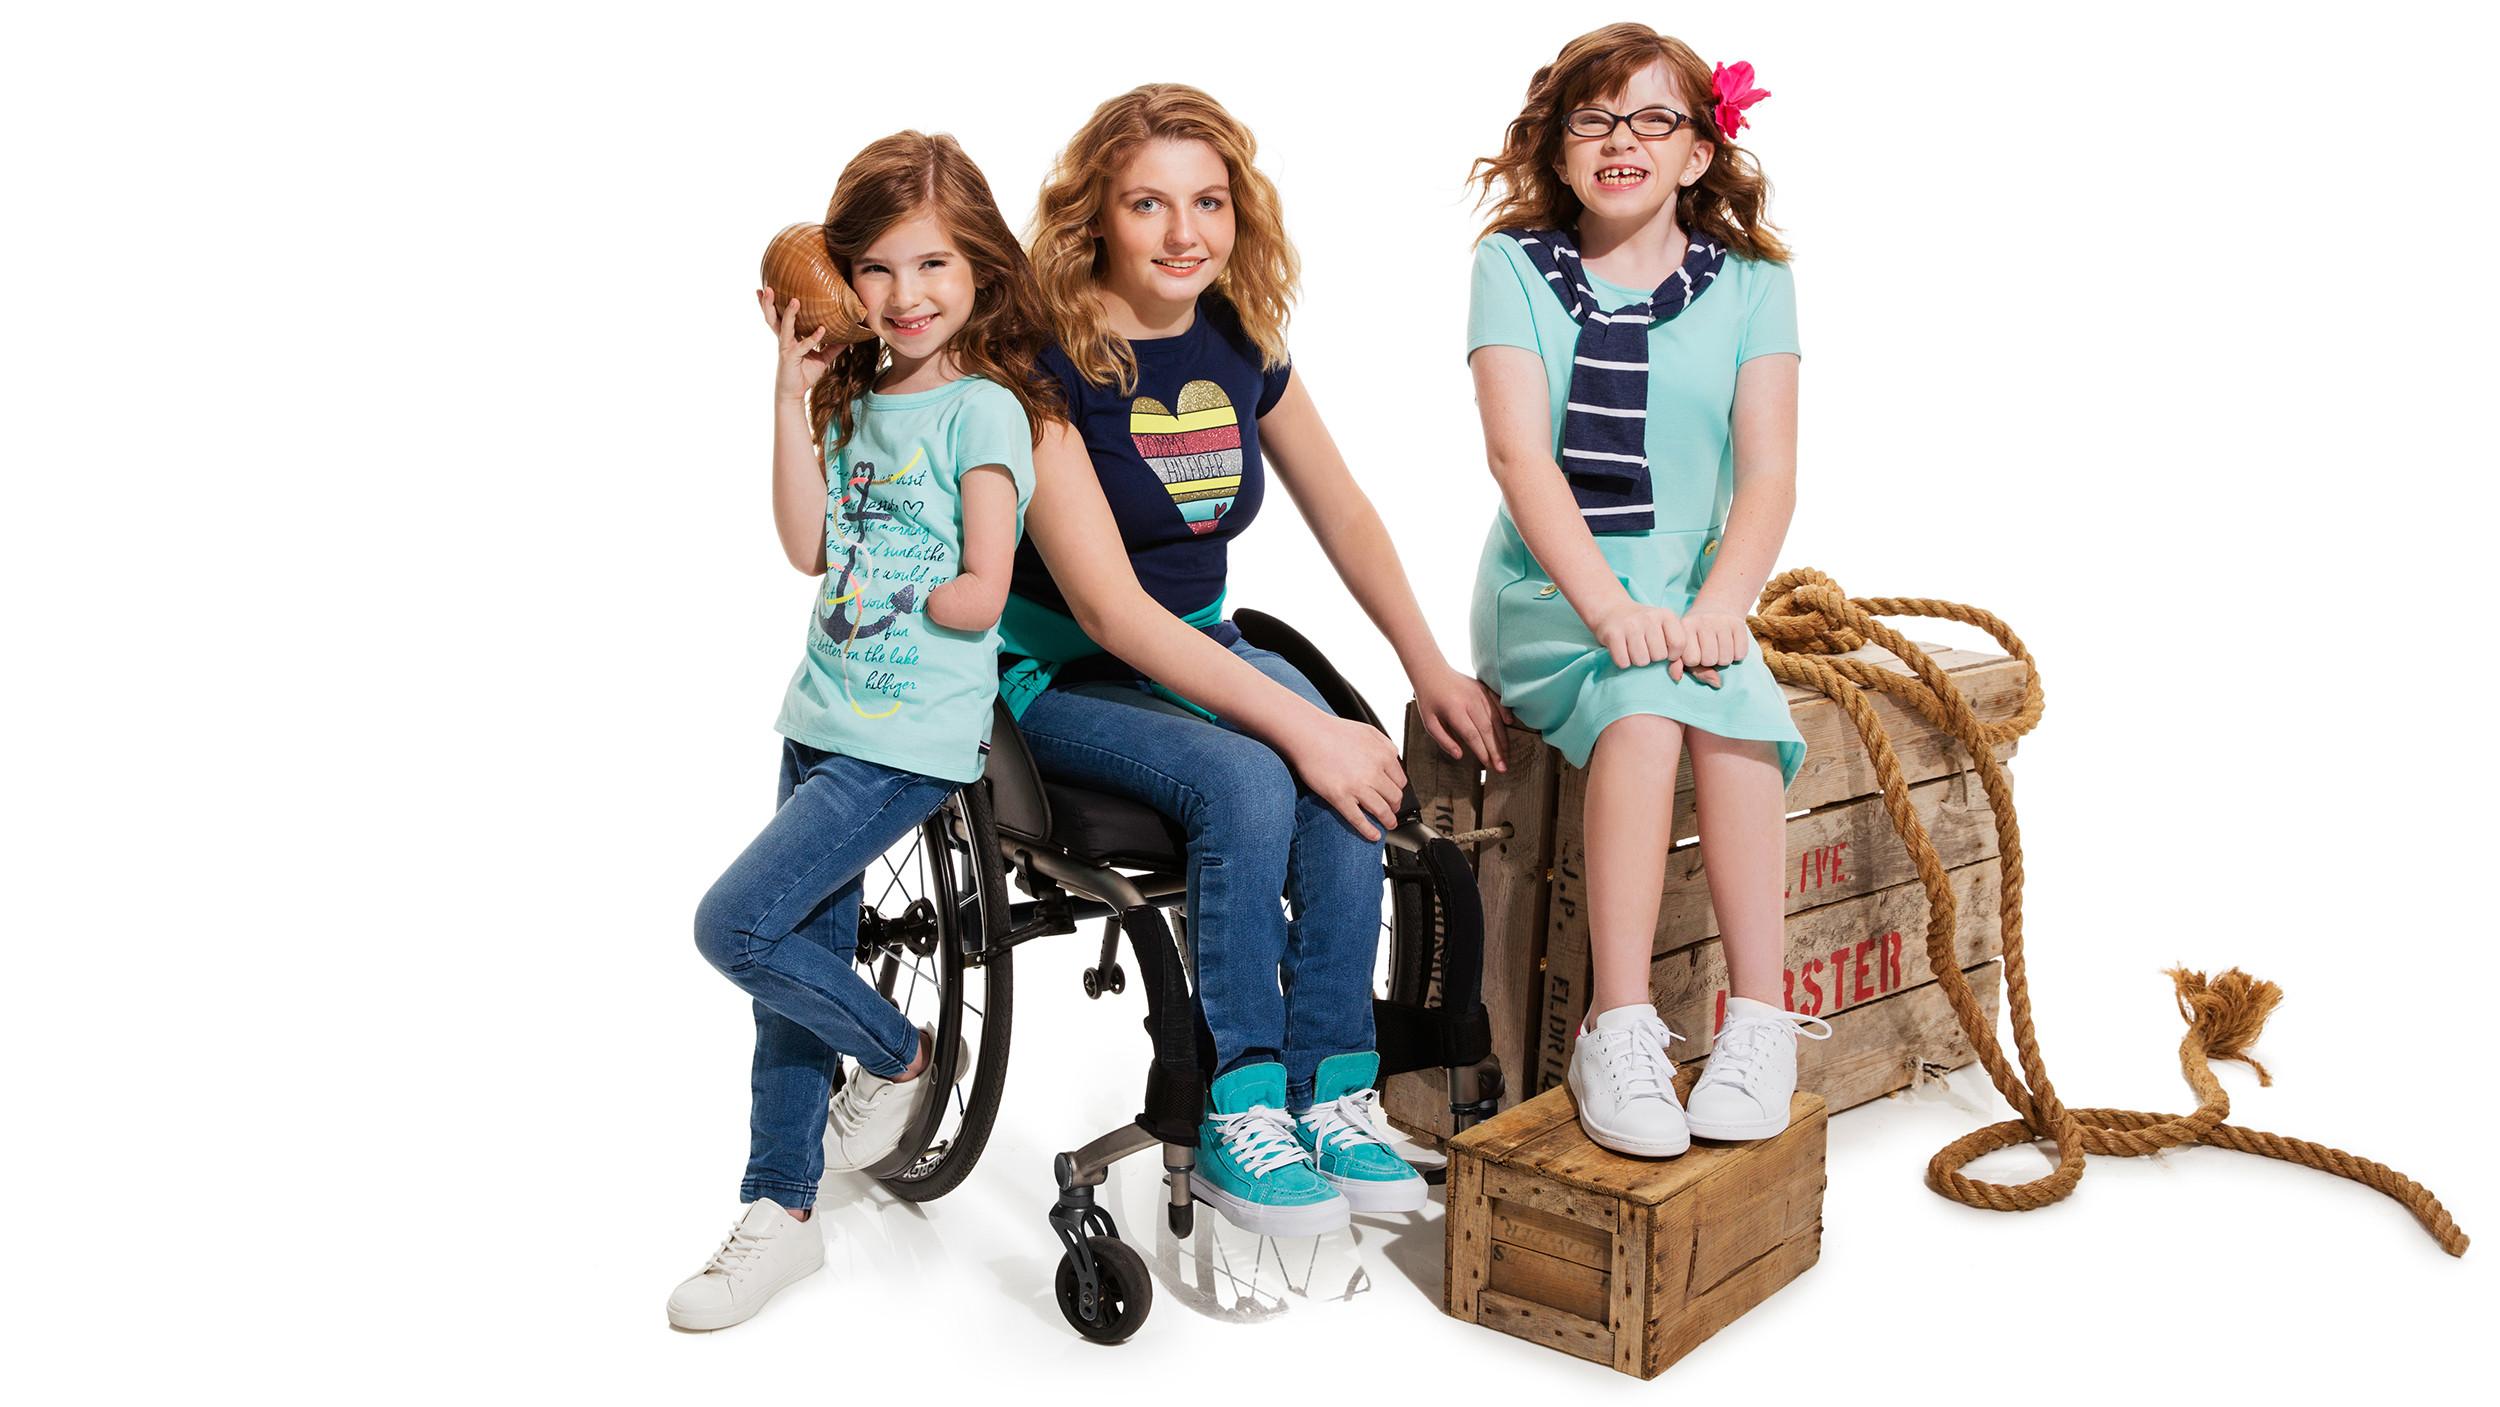 Kids Fashion Wear
 Tommy Hilfiger launches inclusive clothing line for kids